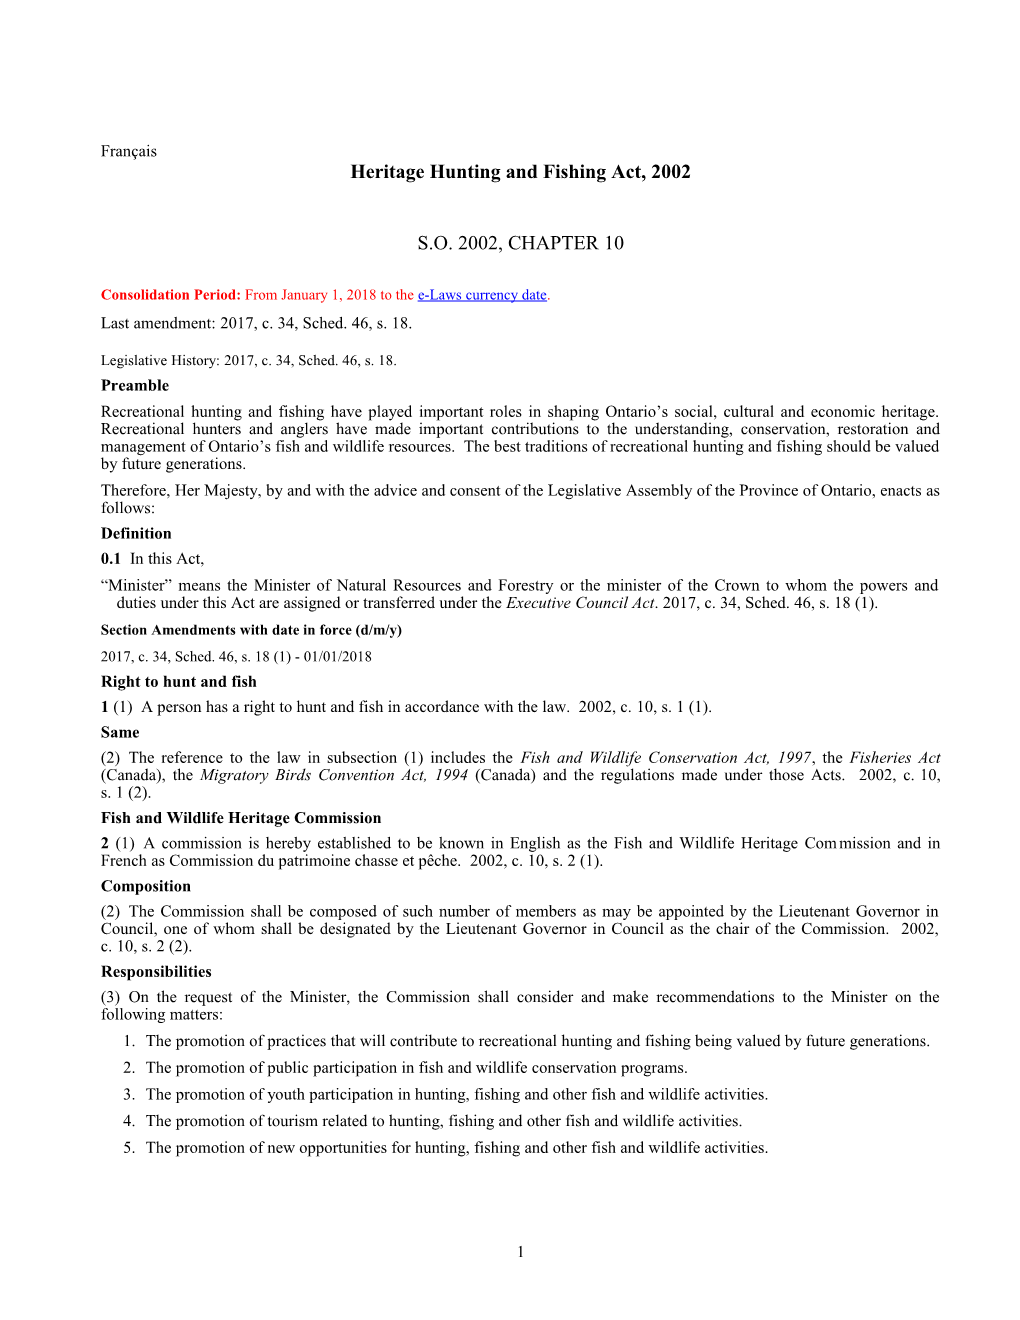 Heritage Hunting and Fishing Act, 2002, S.O. 2002, C. 10